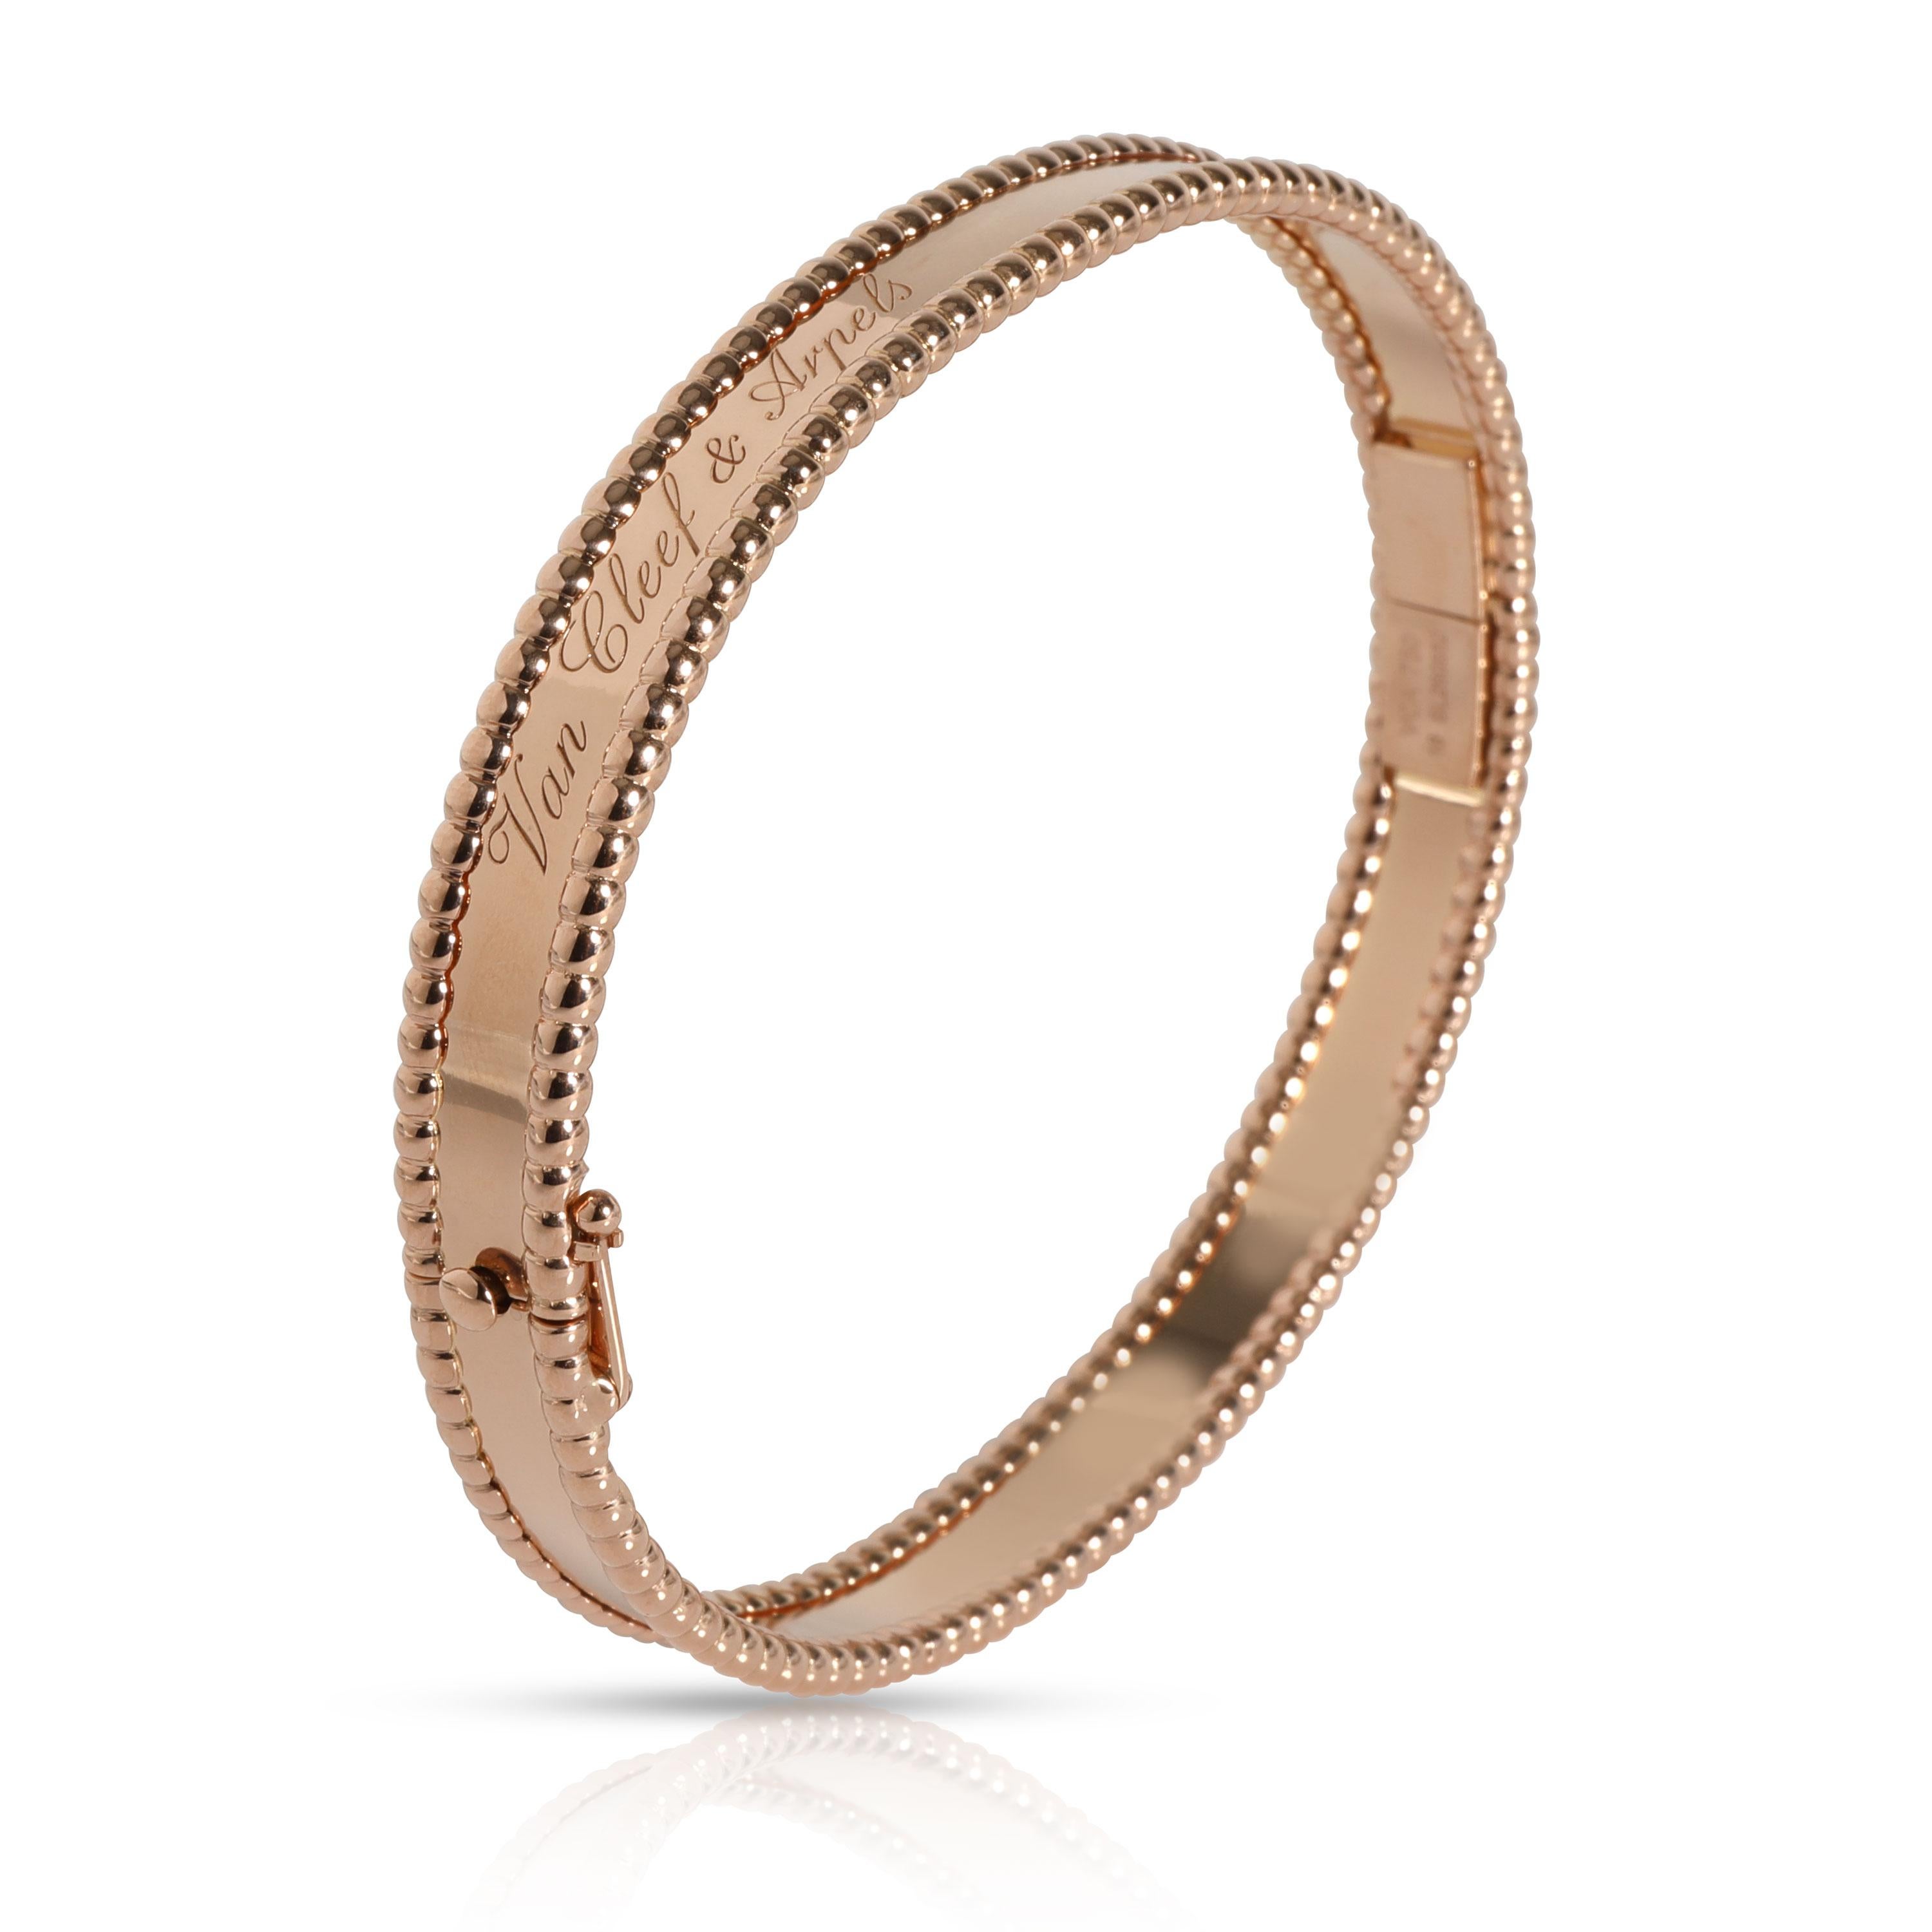 
Van Cleef & Arpels Perlee Bracelet in 18K Rose Gold

PRIMARY DETAILS
SKU: 105219
Listing Title: Van Cleef & Arpels Perlee Bracelet in 18K Rose Gold
Condition Description: Retails for 6,300 USD. In excellent condition and recently polished by Van